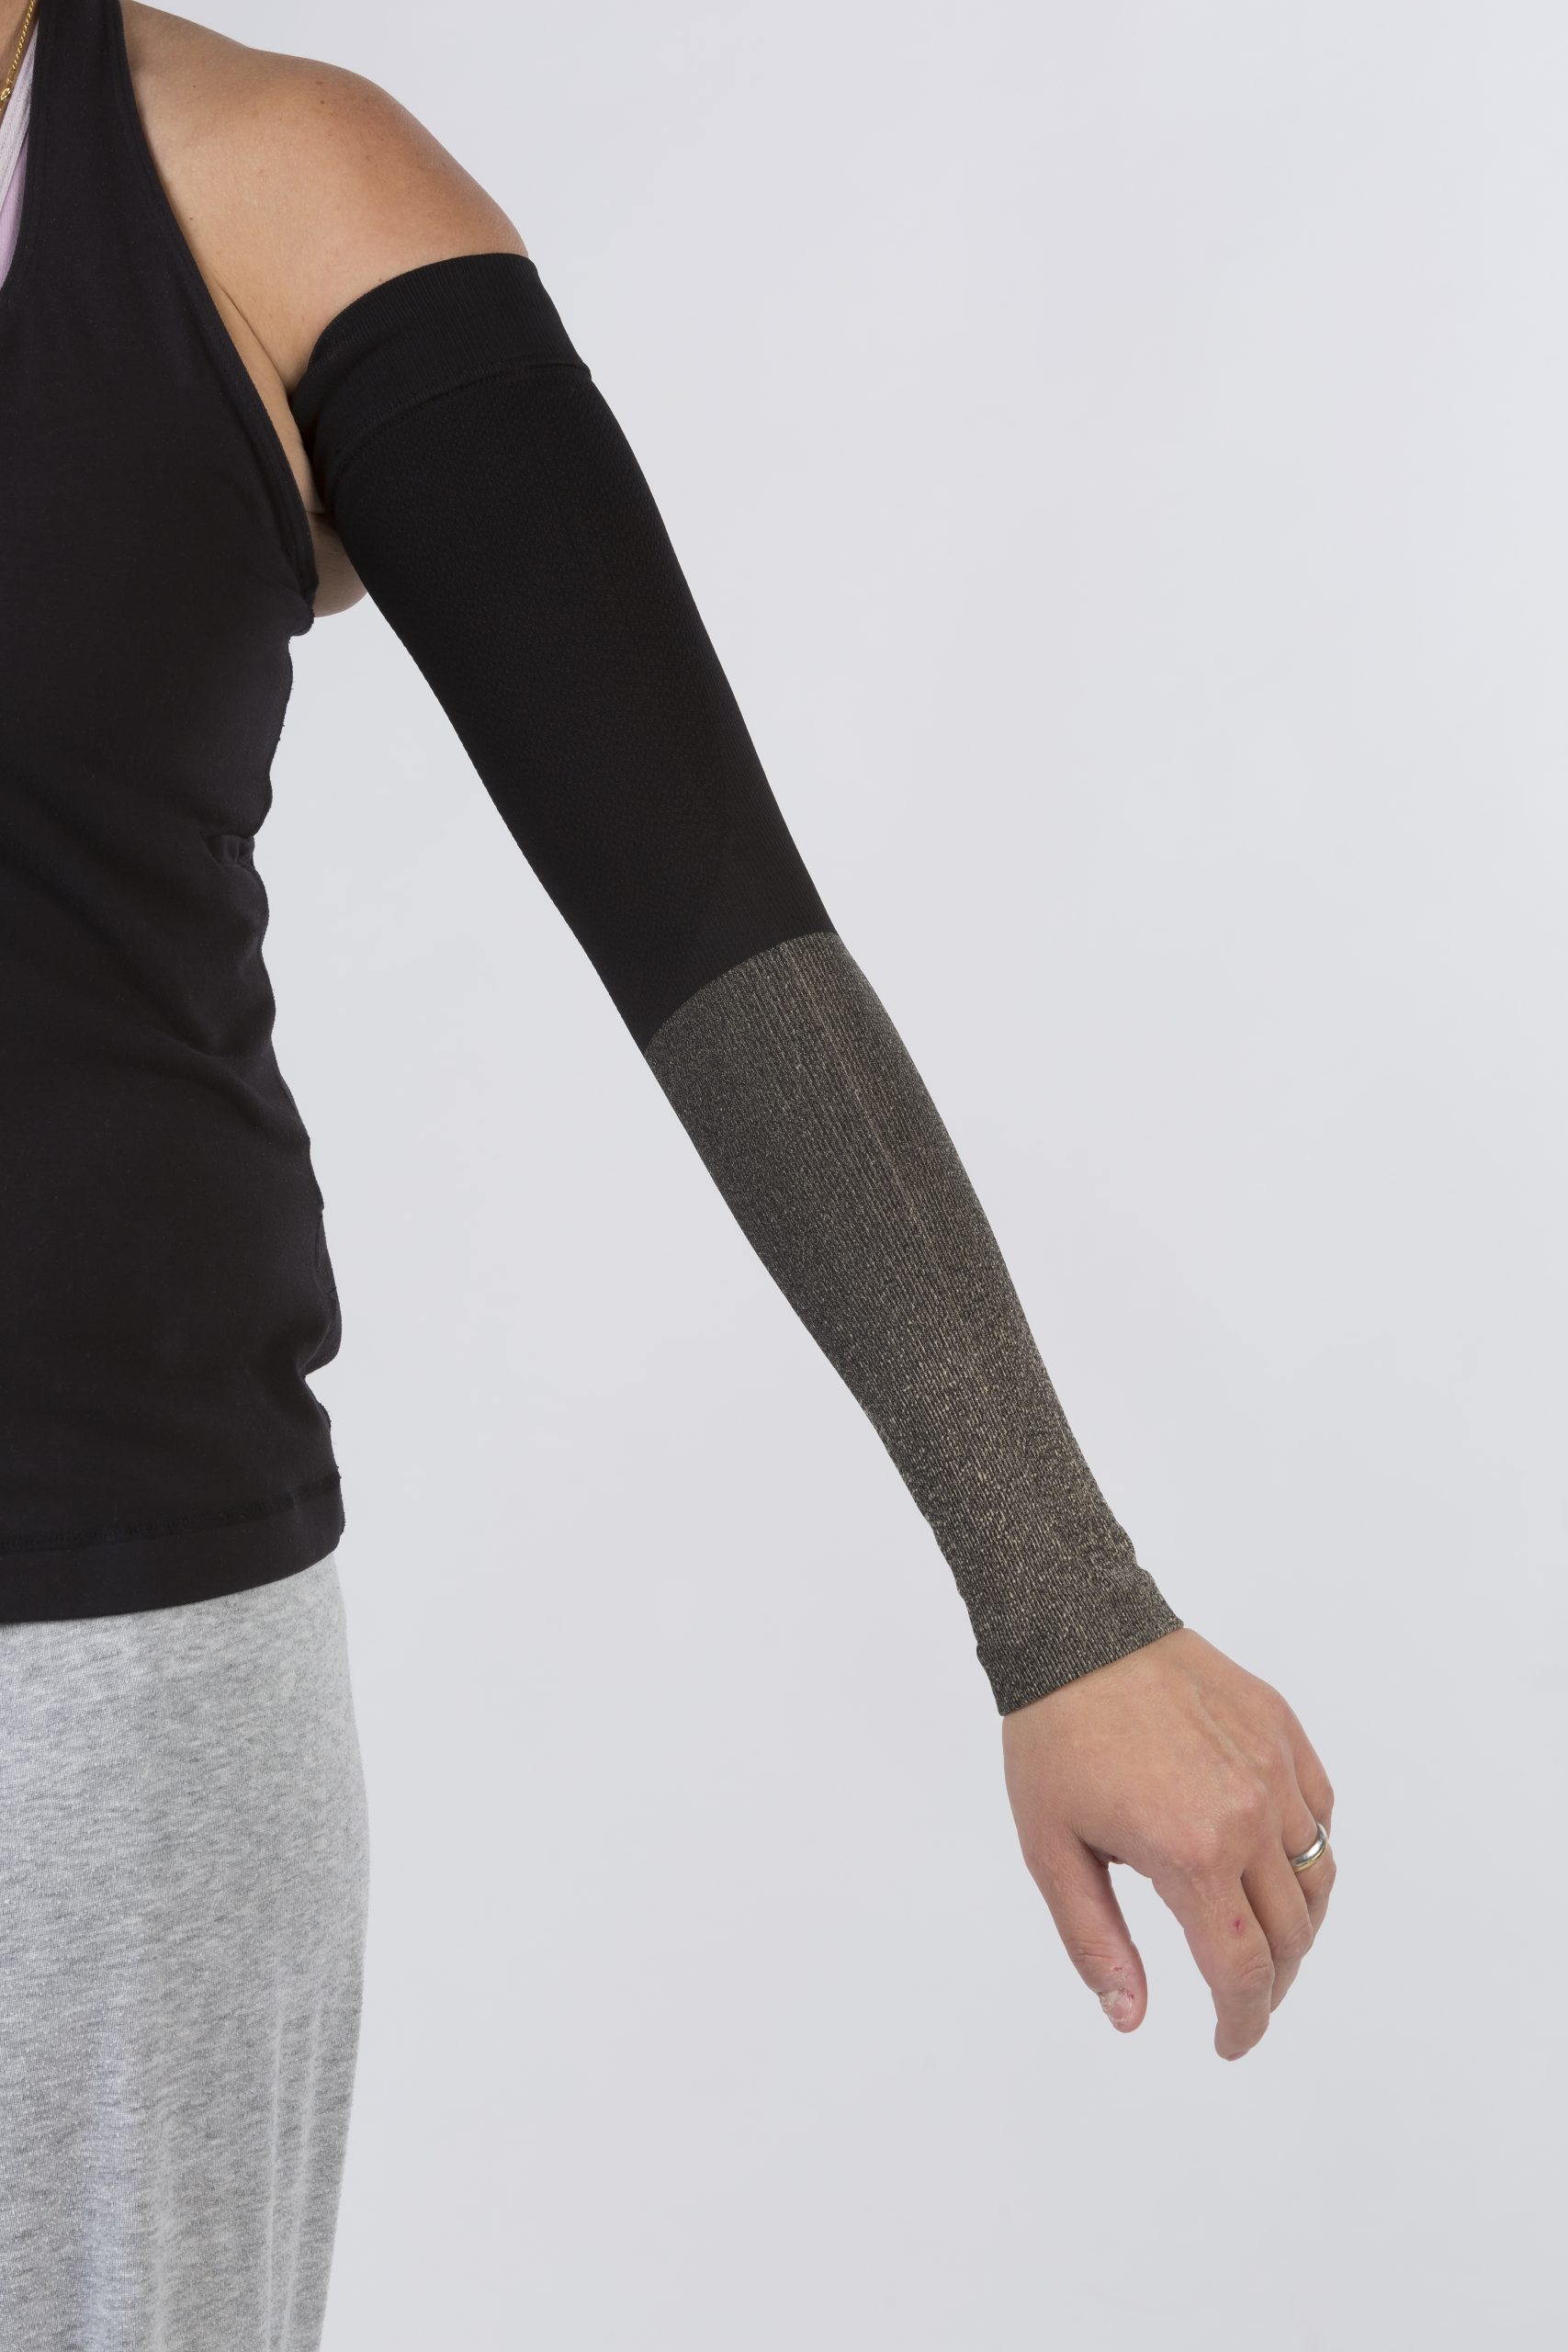 OST Power Sleeve Full Arm (2 Sleeves) | On Site Therapy Tallahassee